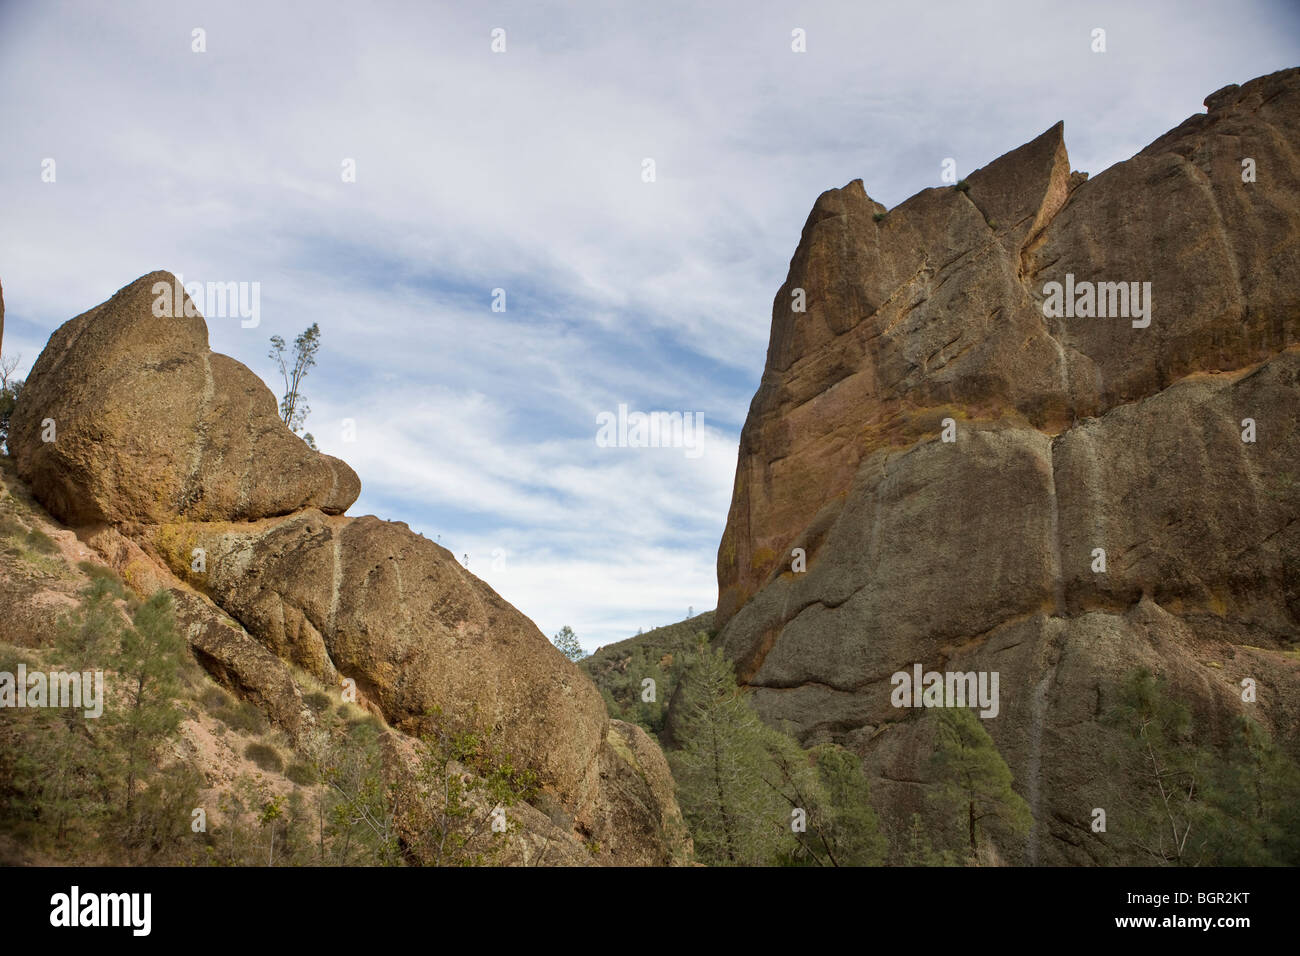 Machete Ridge viewed from the Balconies Cliffs Trail, Pinnacles National Monument, California, United States of America Stock Photo